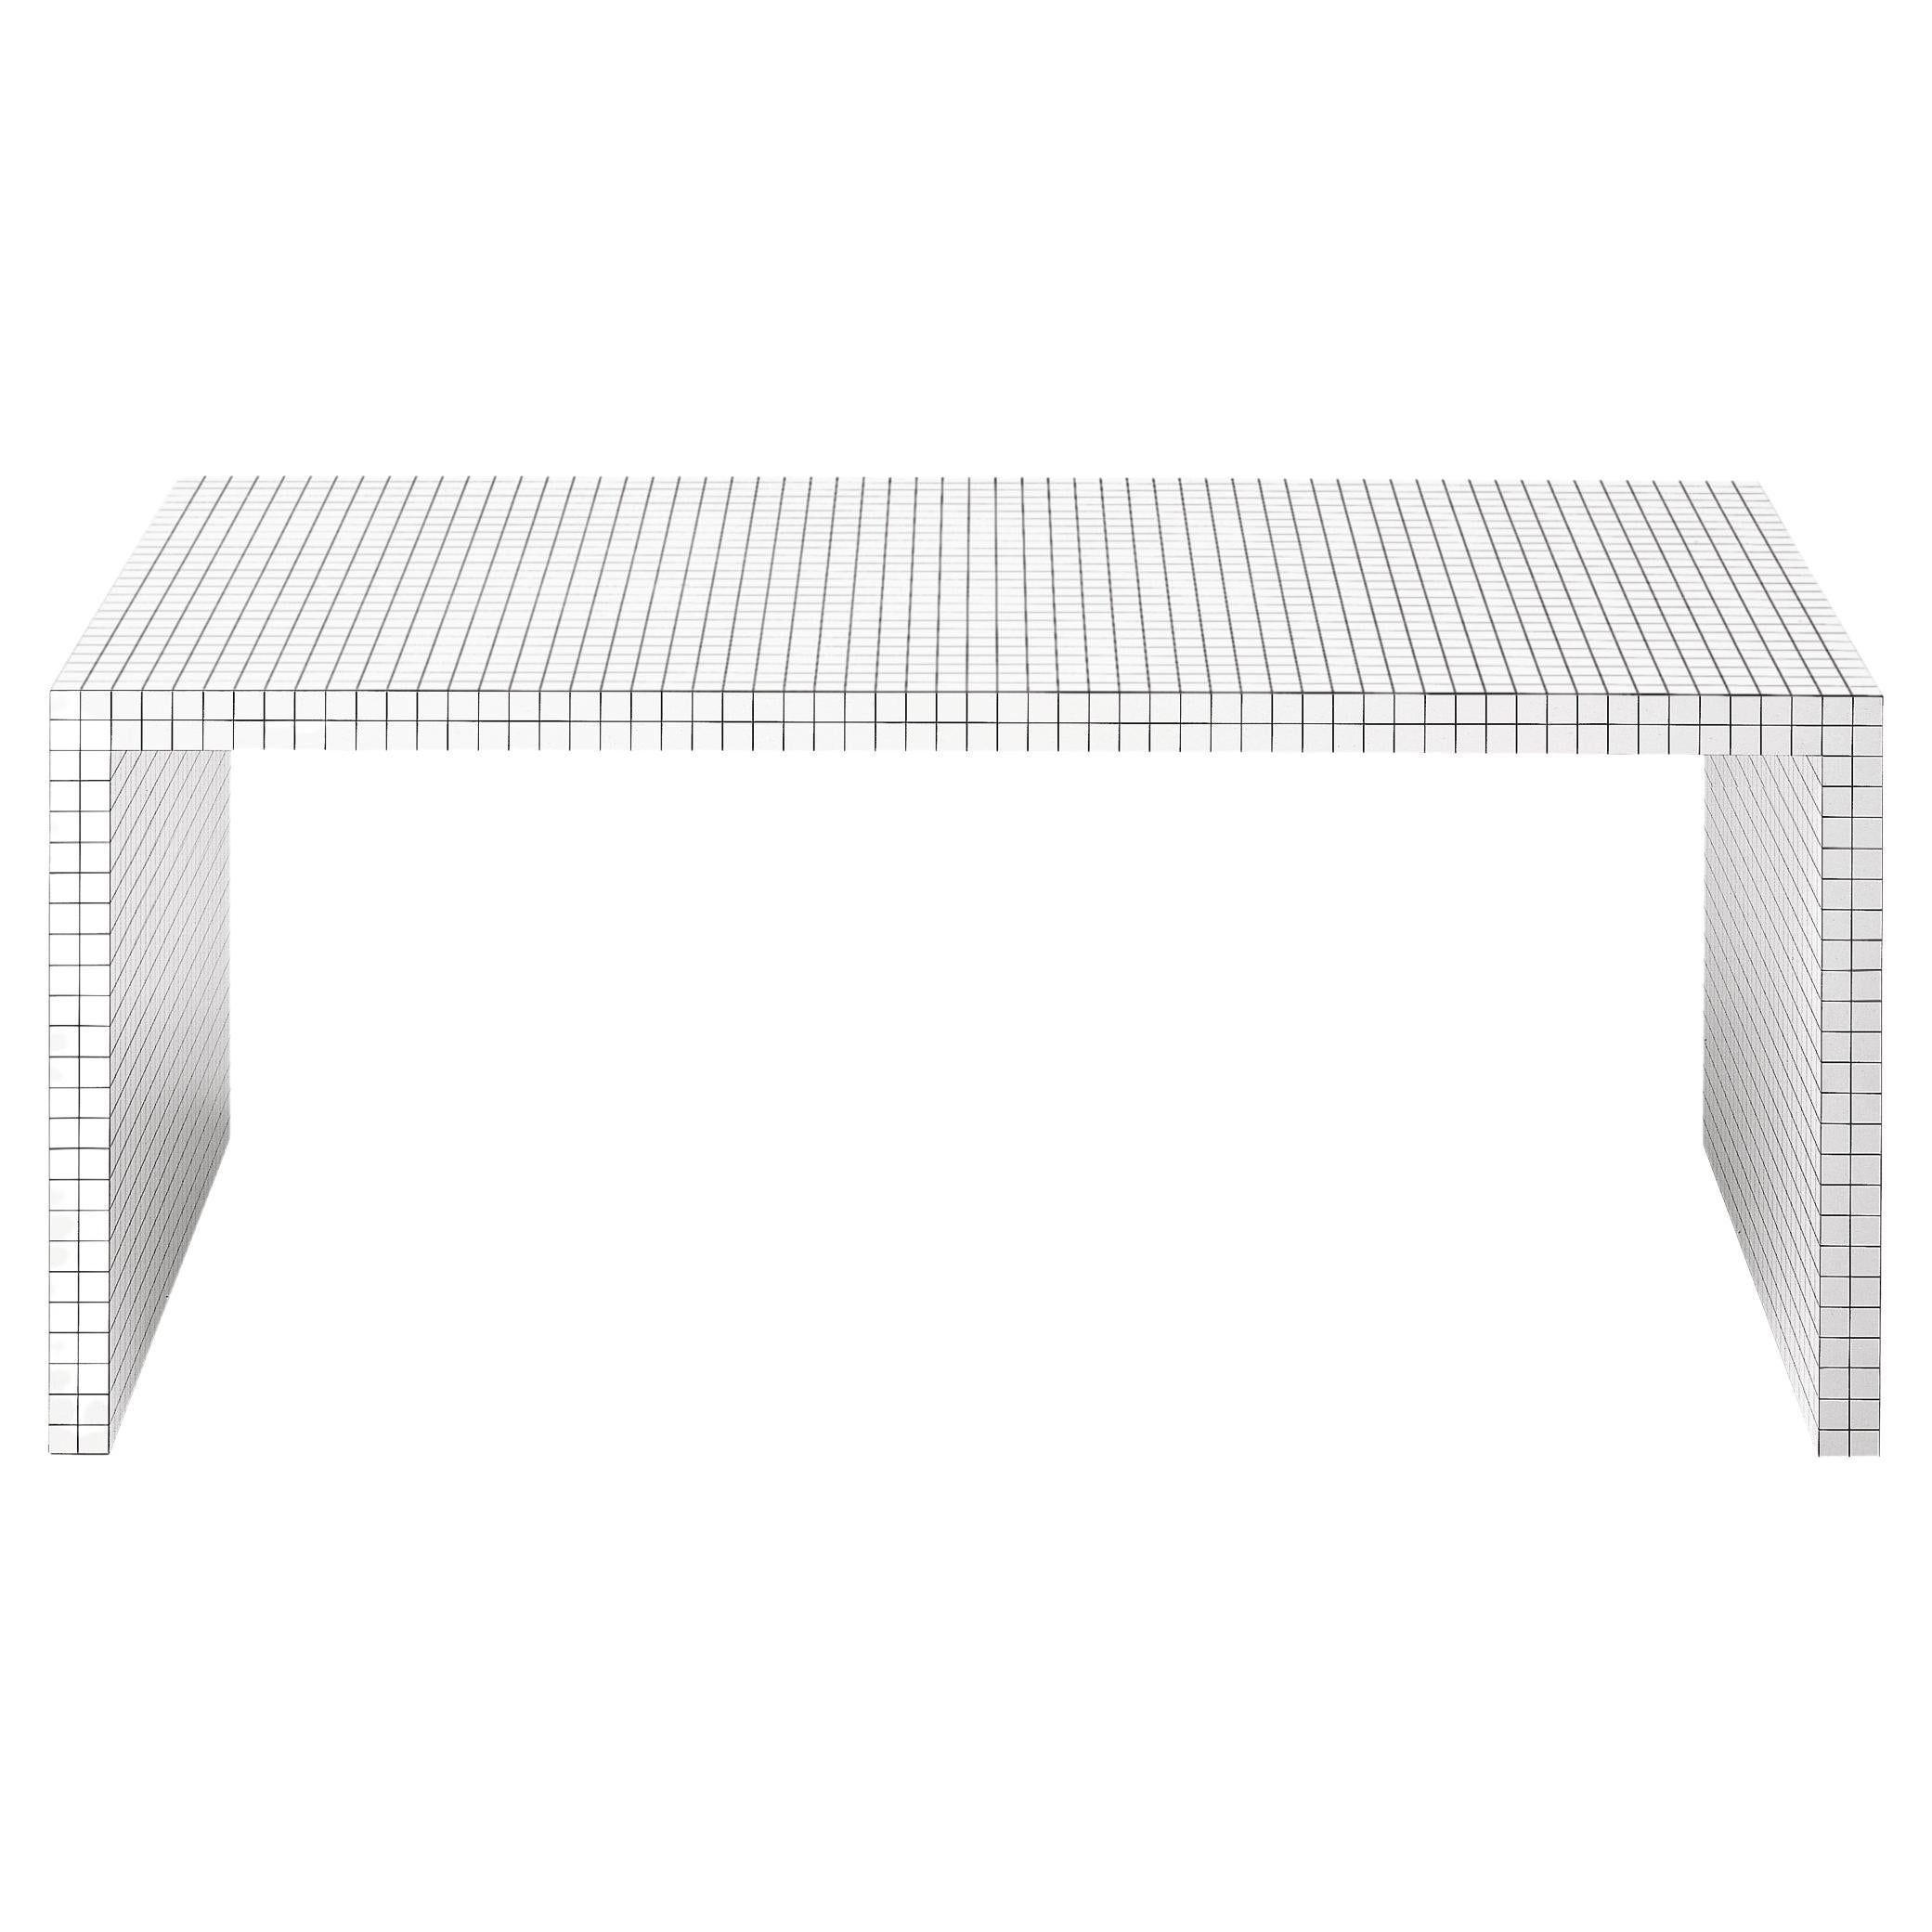 Zanotta Quaderna Table/Writing Desk in White Plastic Laminate by Superstudio

Honeycomb core structure coated with white plastic laminate, digitally printed with black squares at 1 3/16” spacing.

Additional Information:
Material: Plastic